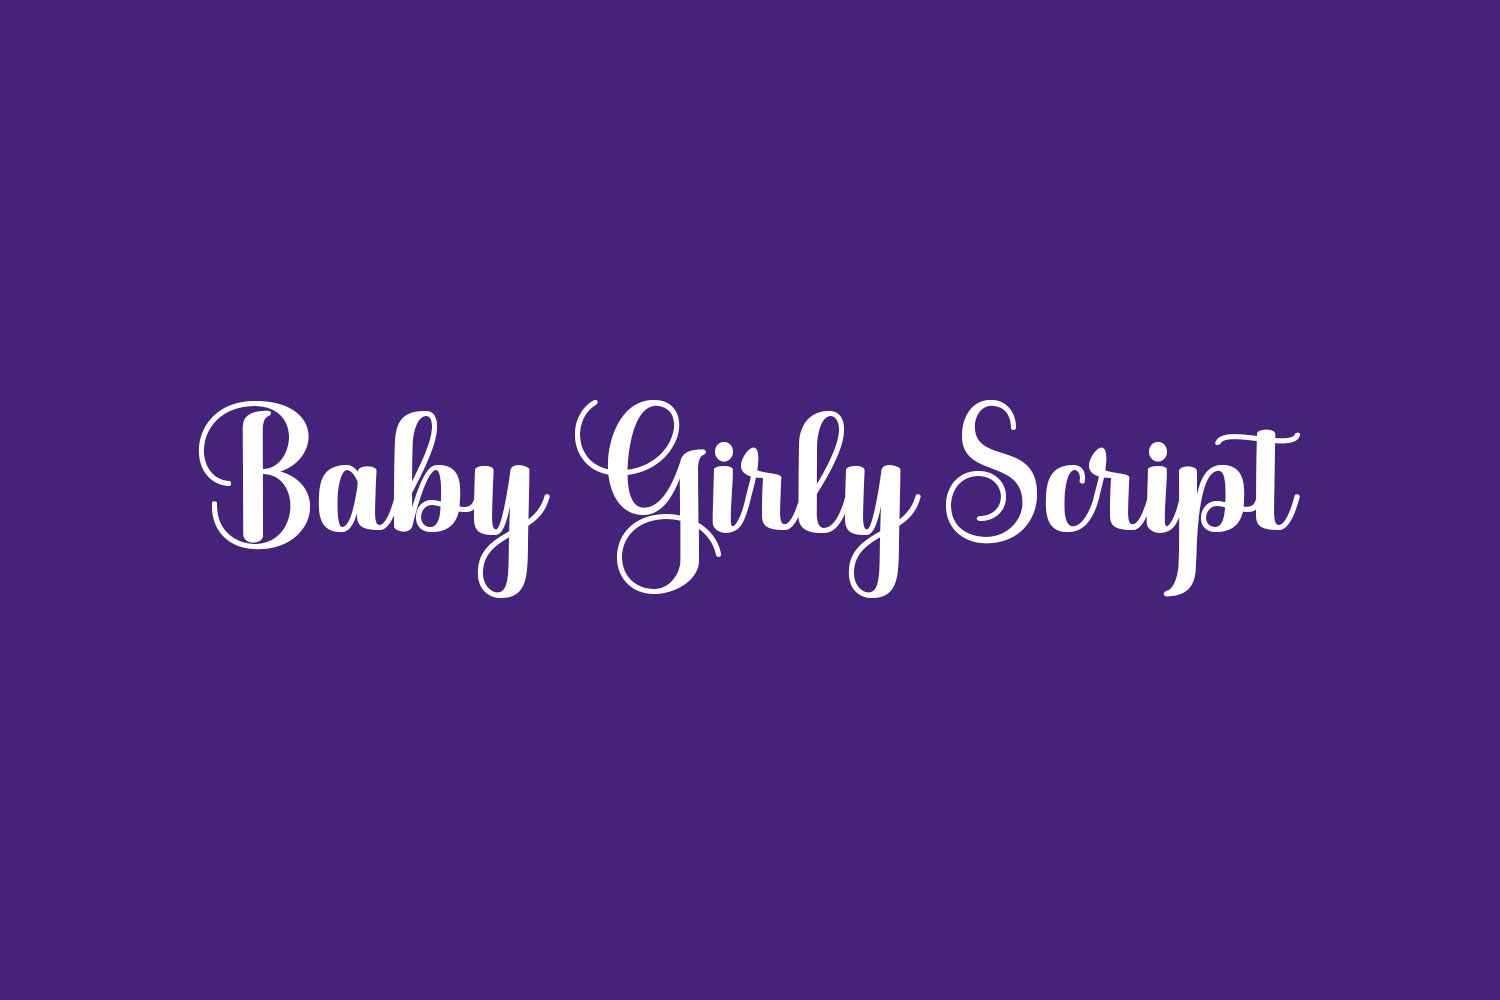 Baby Girly Script Free Font